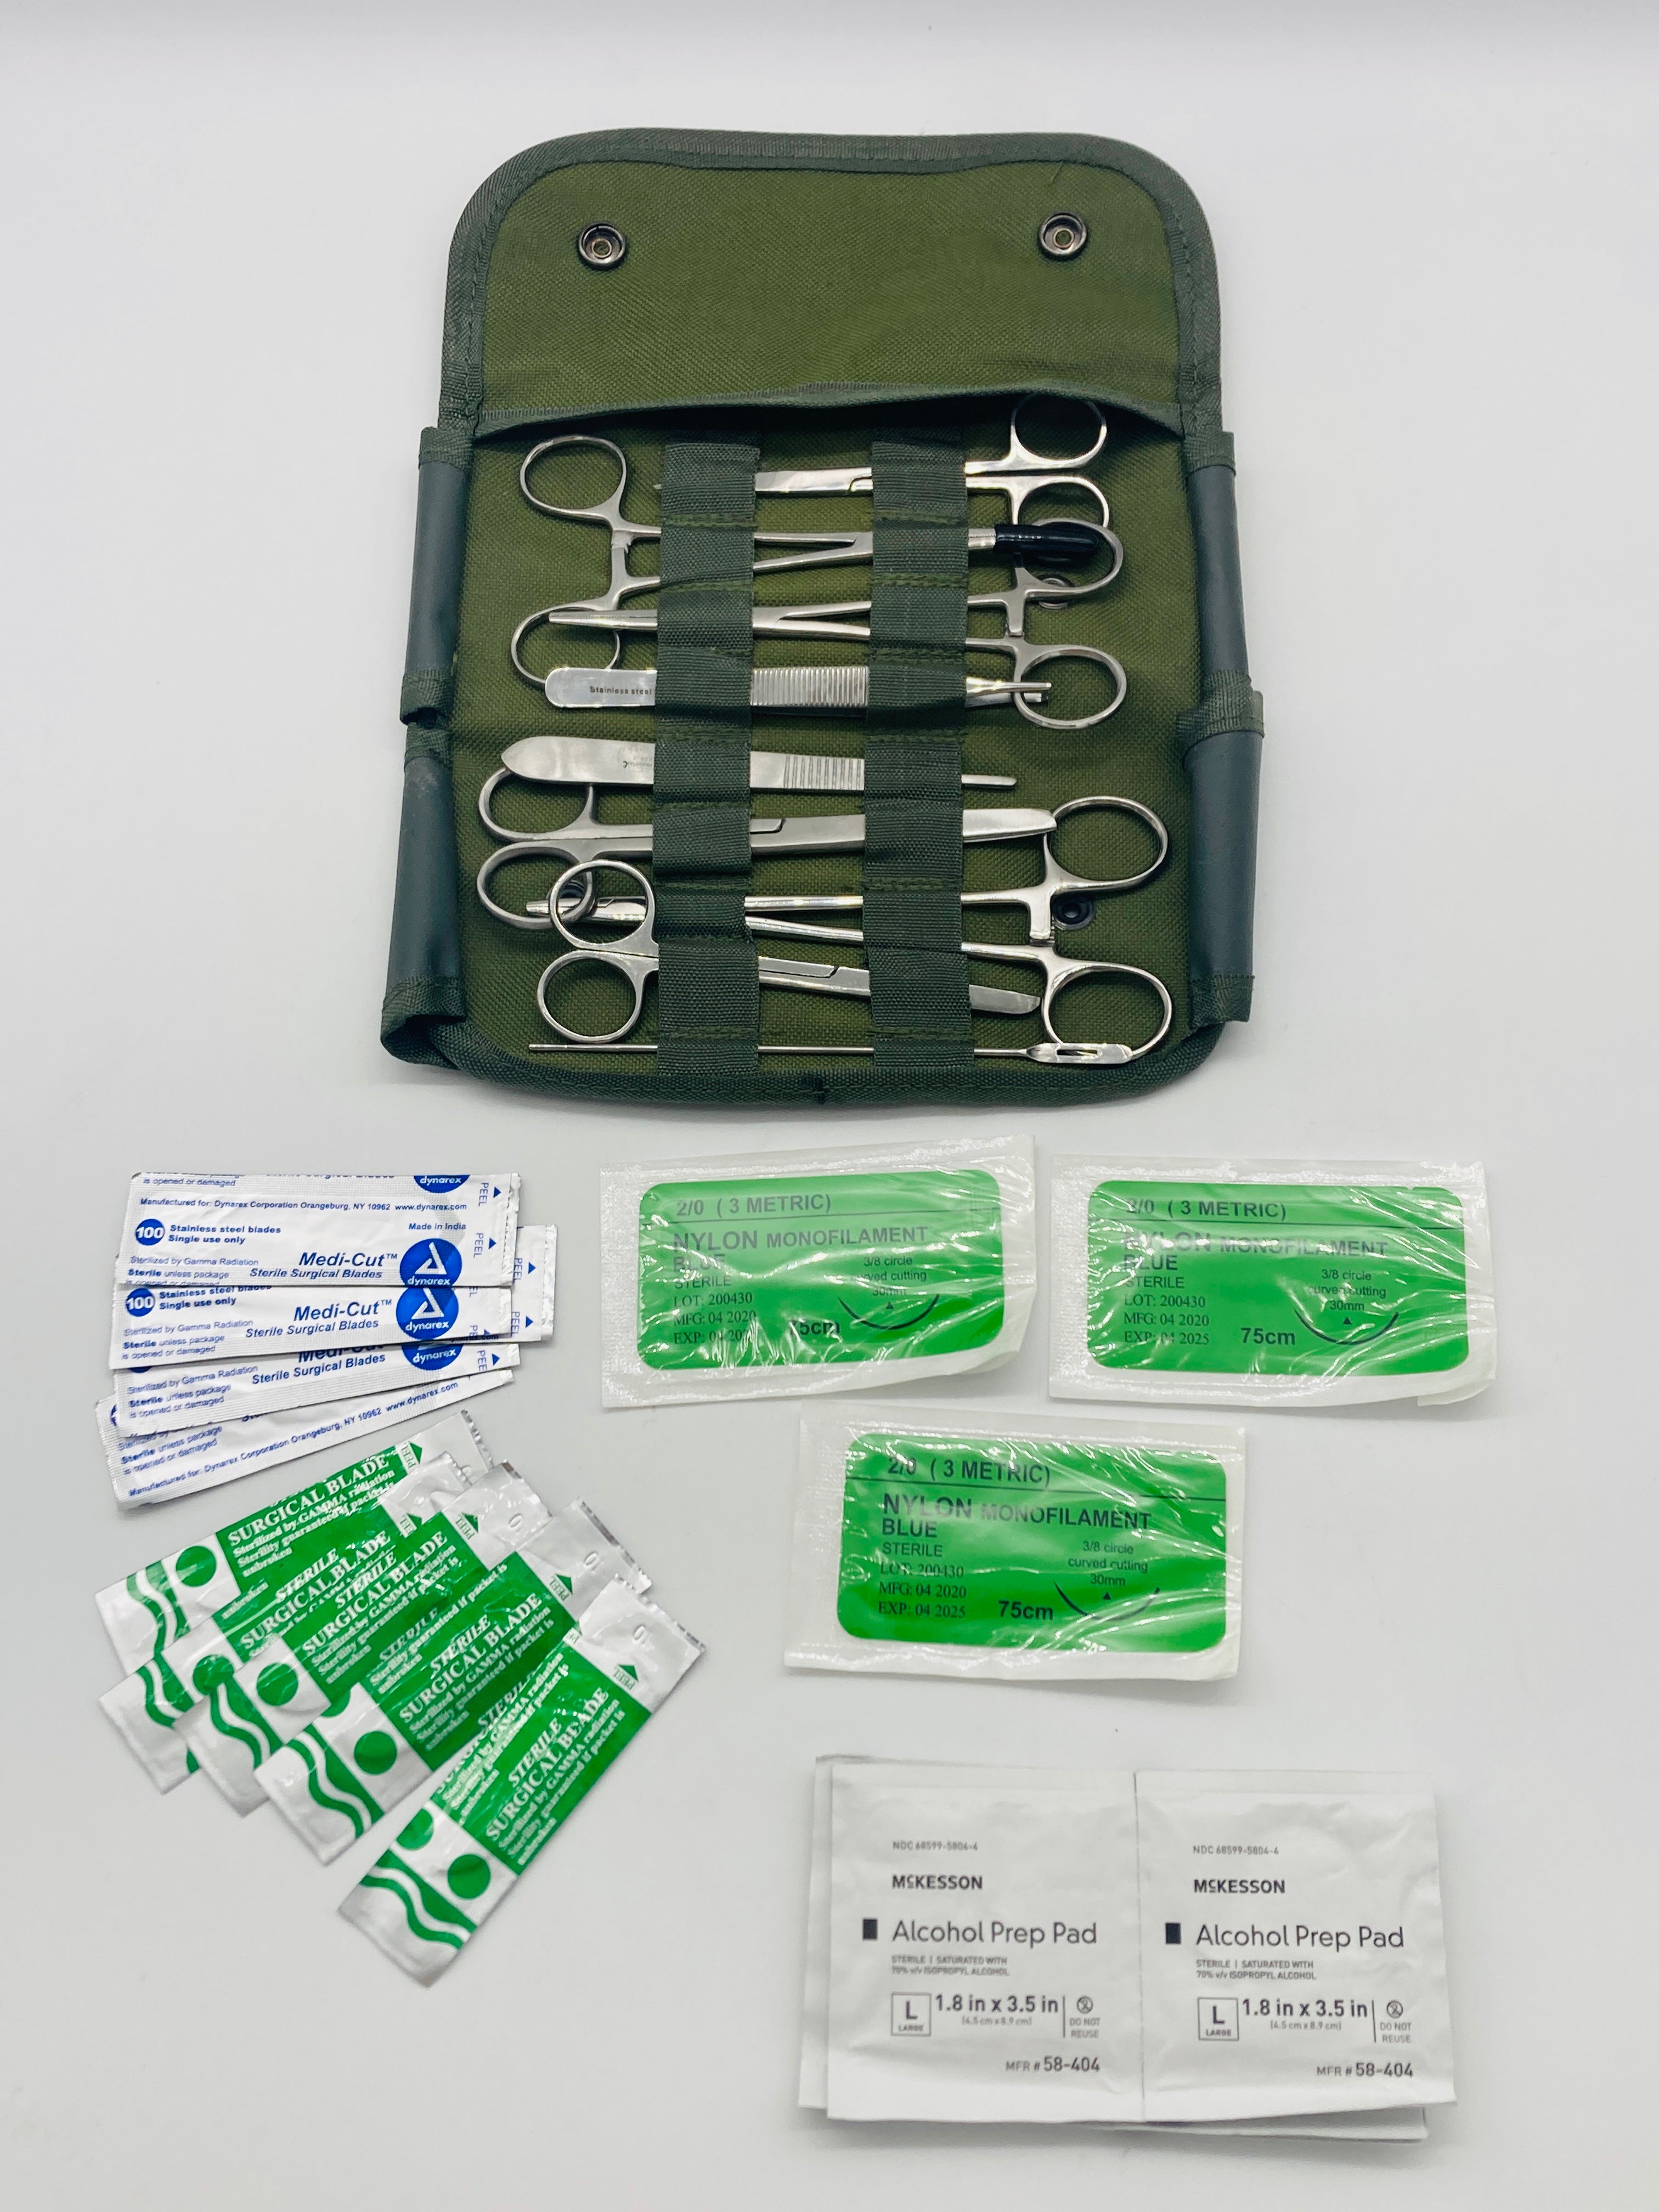 Tactical Surgical and Suture Kit U.S Military Approved